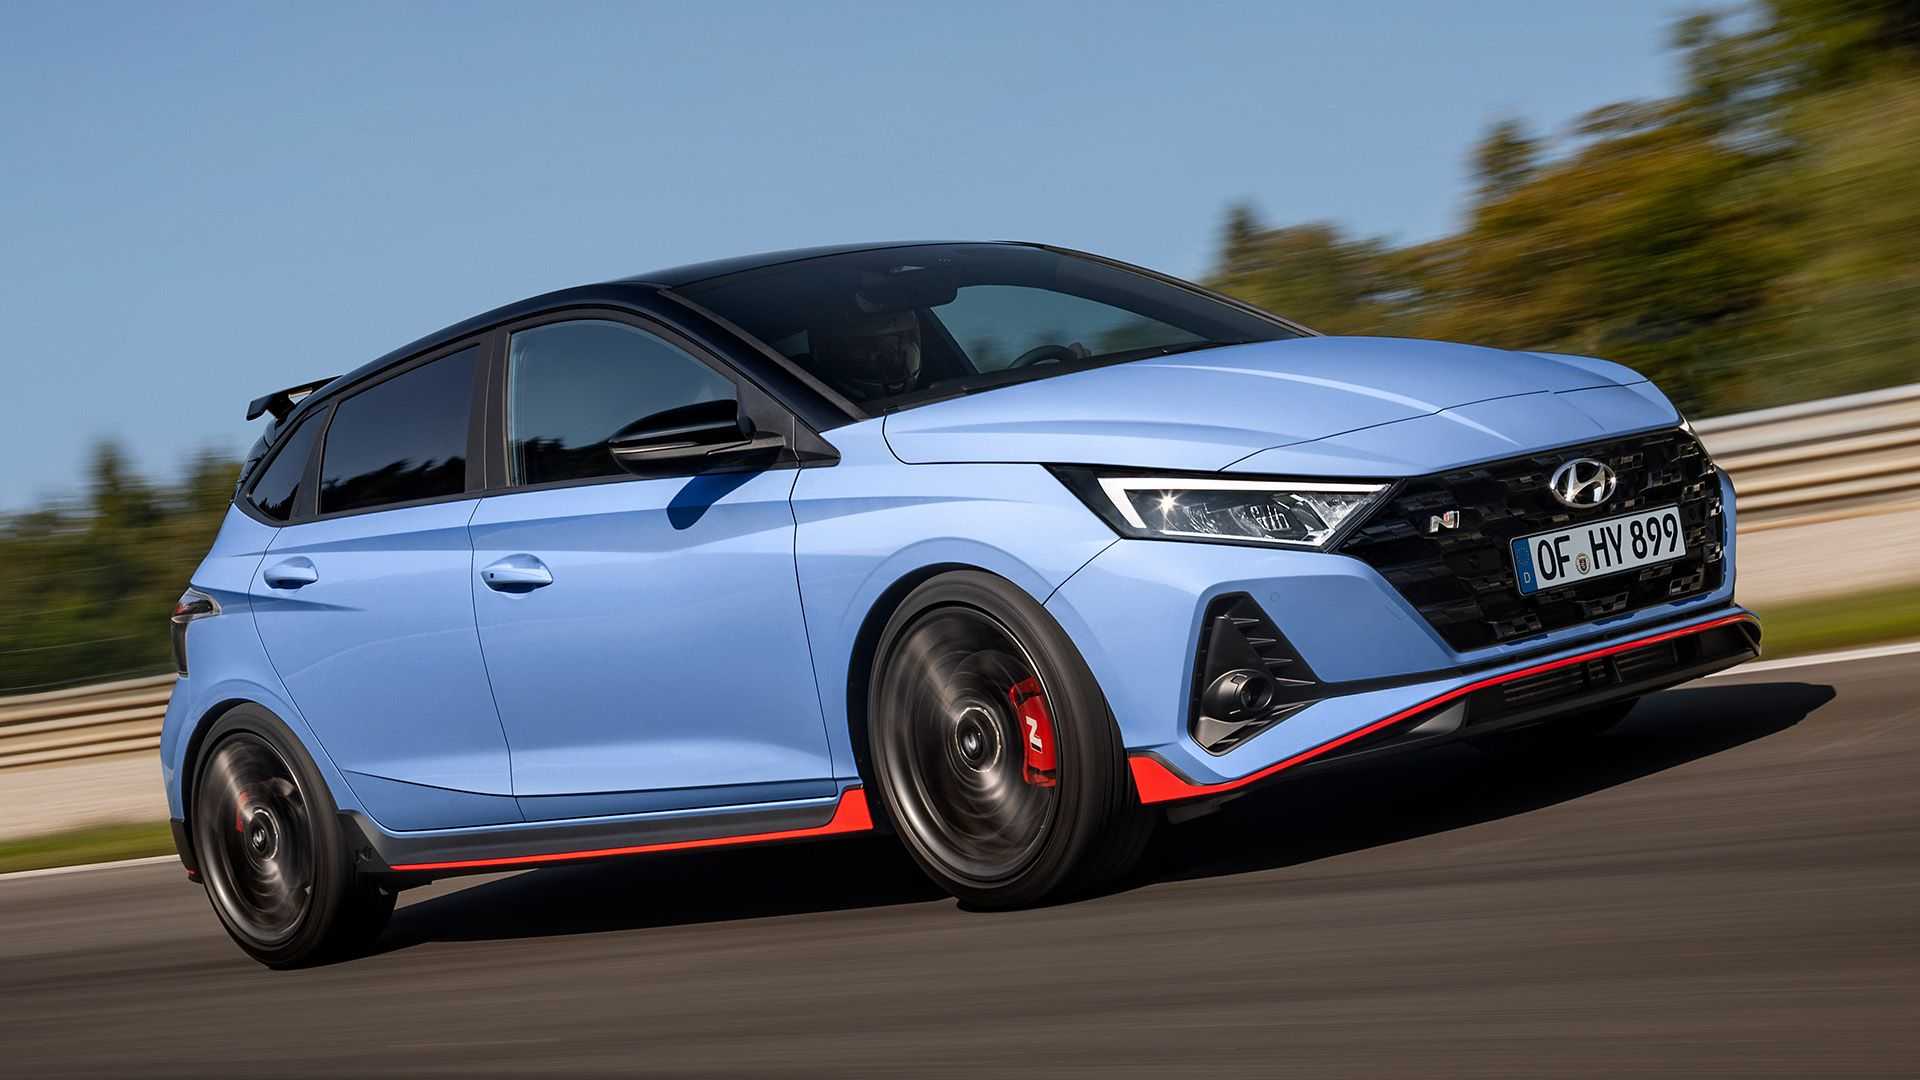 Hot Hatches Are Dead Except For the 2021 Hyundai i20 N